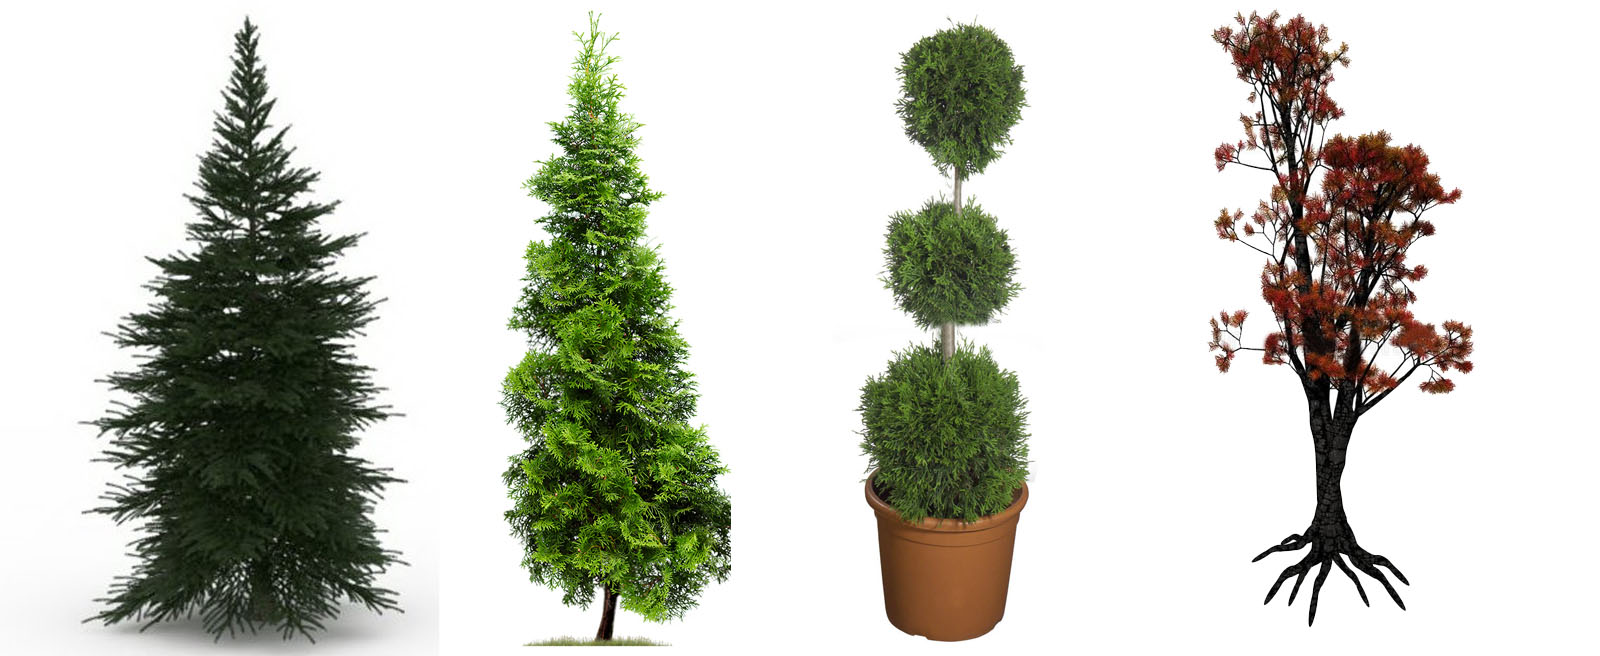 What Are The Different Types of Cedars